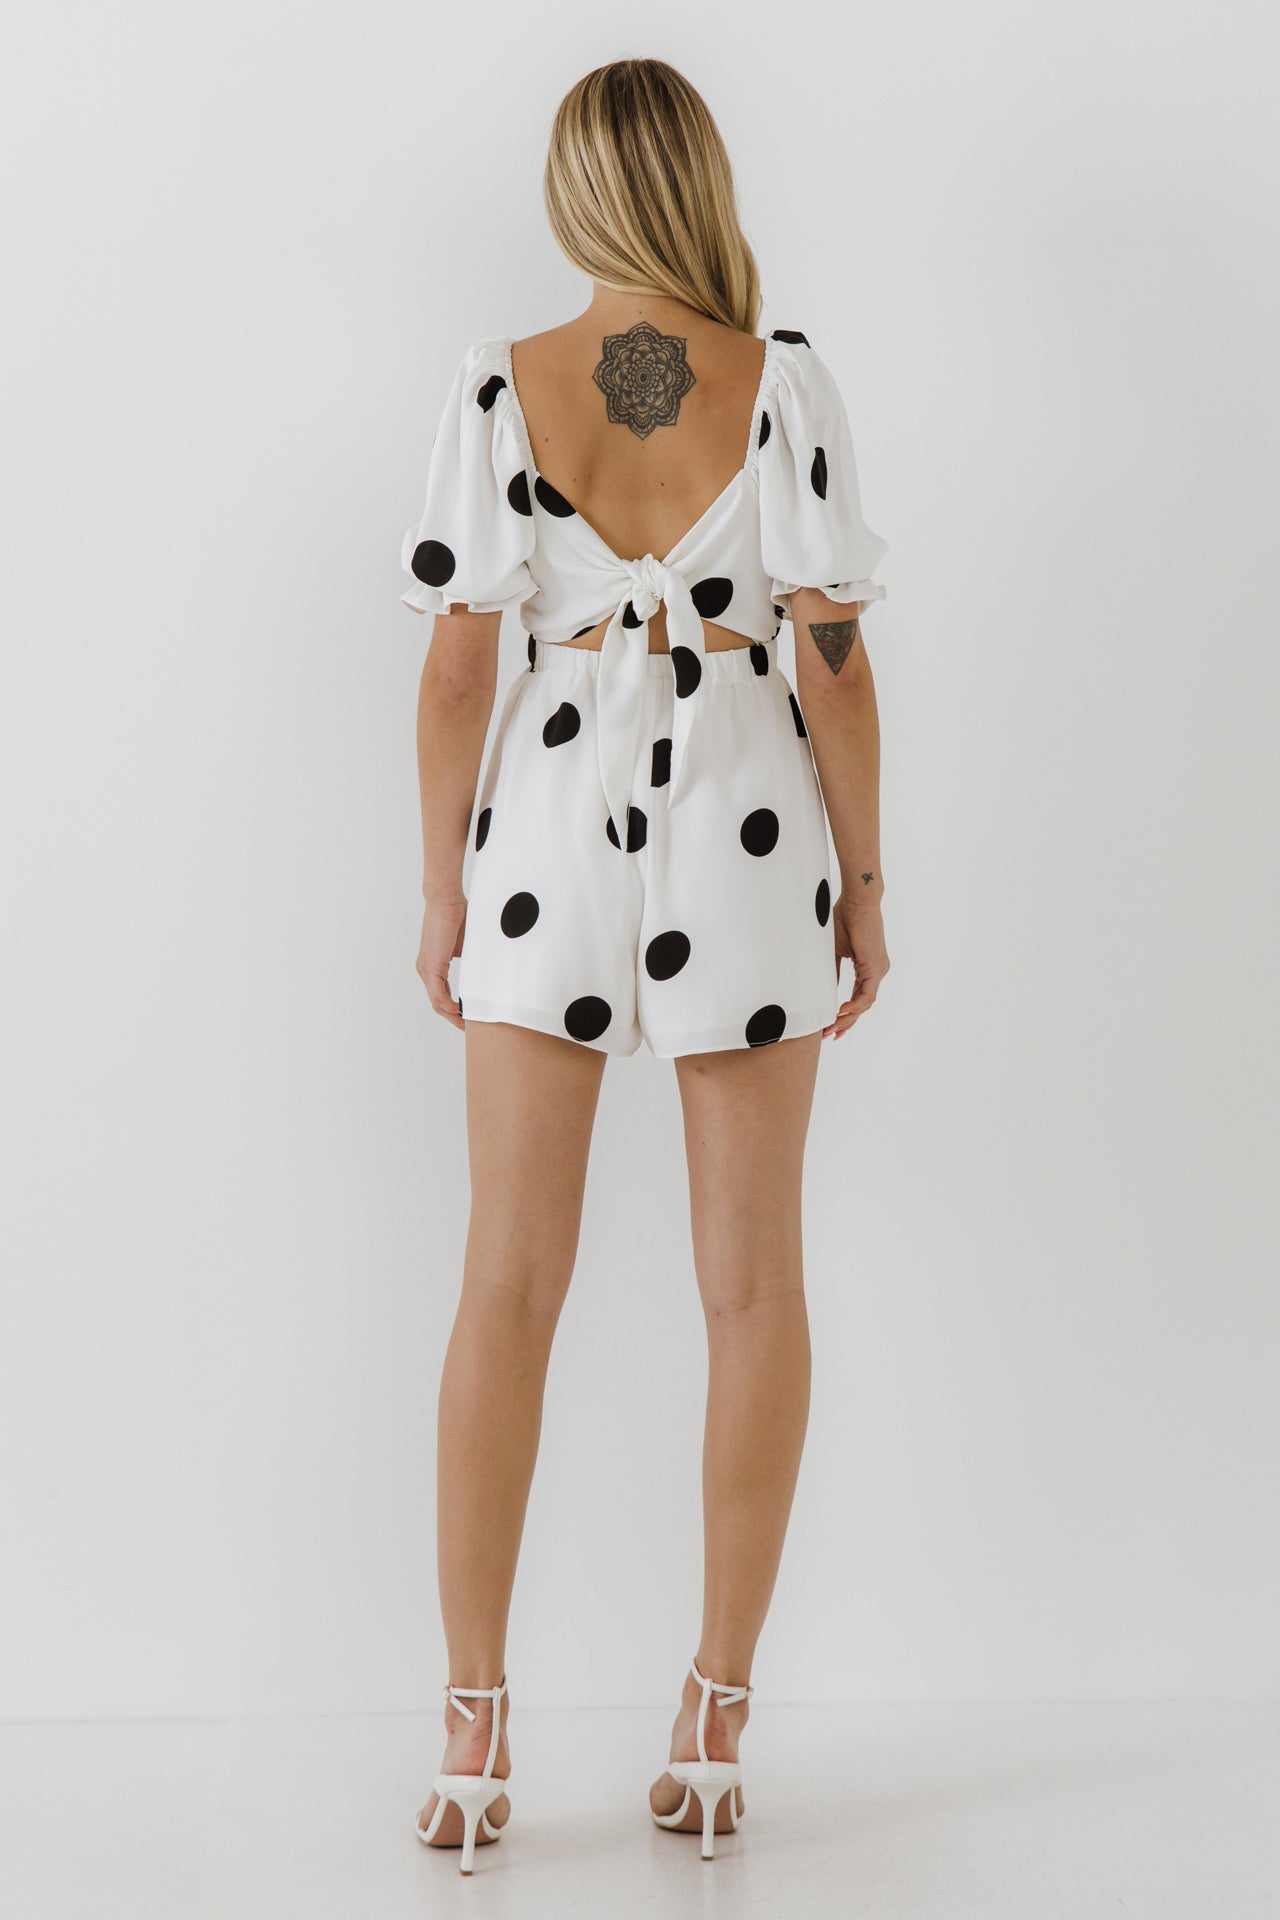 FREE THE ROSES - Ruched Front Romper with Puff Sleeves - ROMPERS available at Objectrare